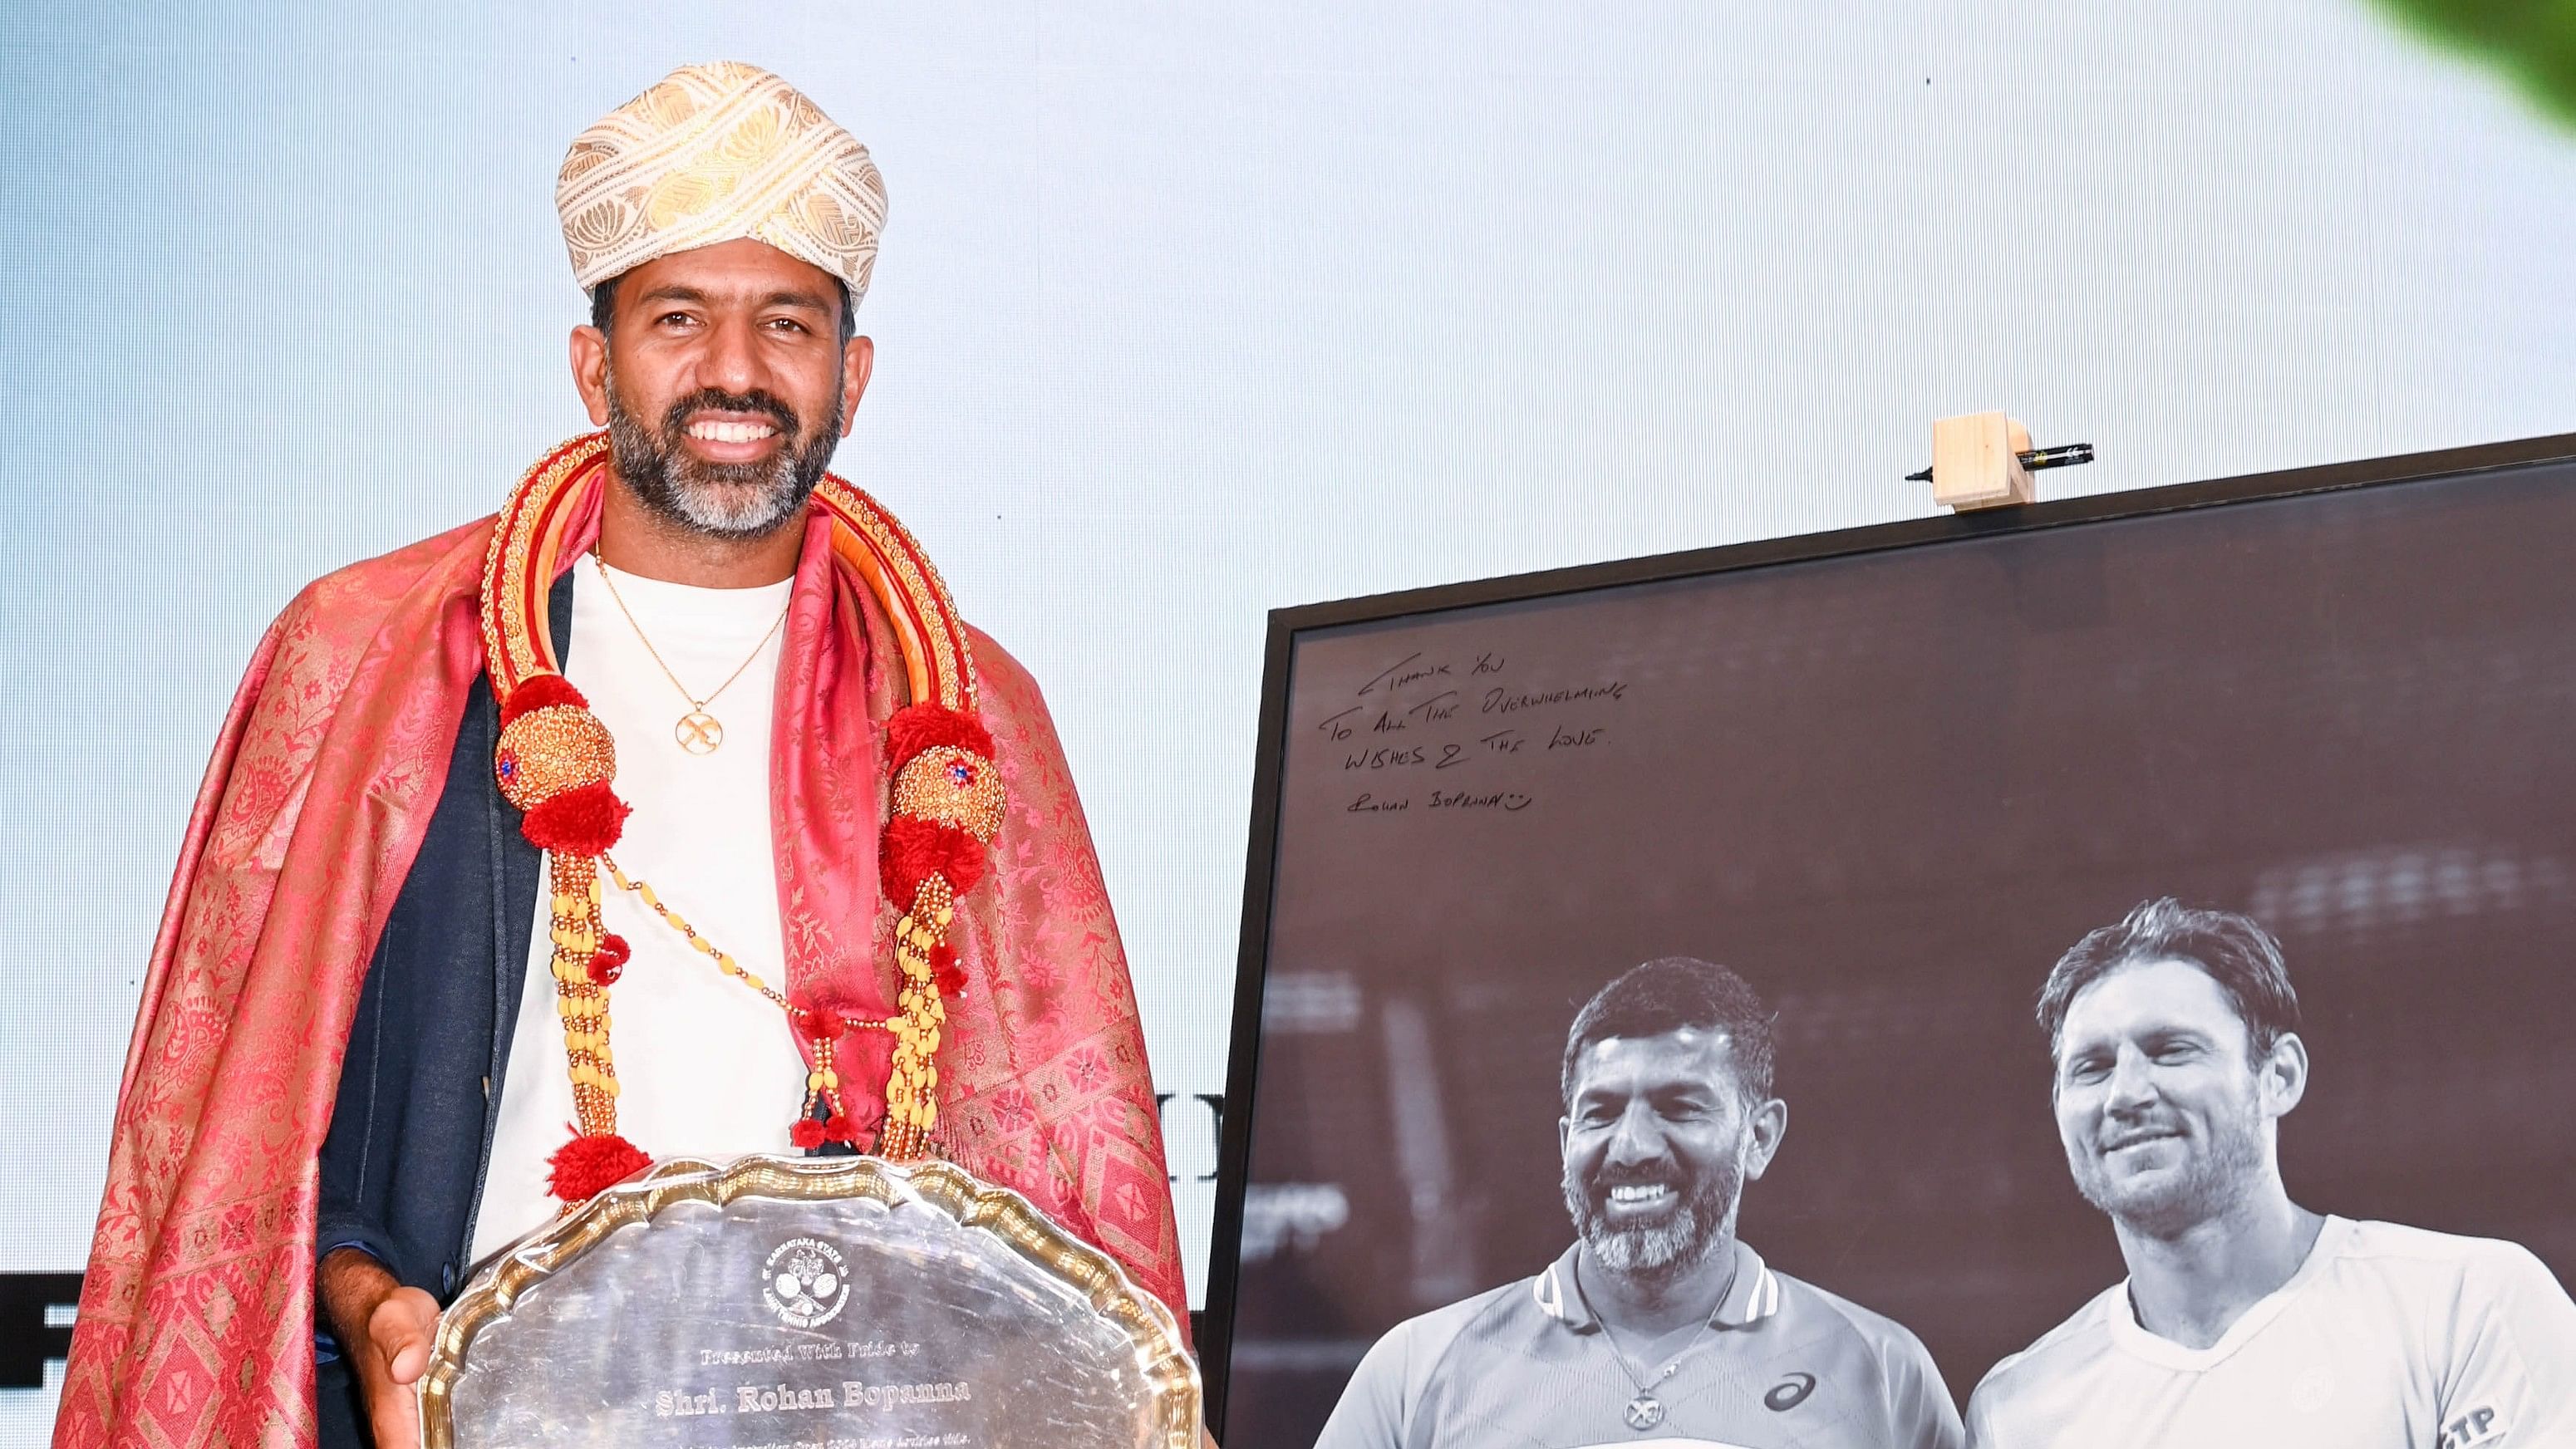 <div class="paragraphs"><p>Rohan Bopanna, who won the Australian Open doubles title for his maiden men’s Grand Slam, was by felicitated by KSLTA in Bengaluru on Monday.&nbsp;</p></div>